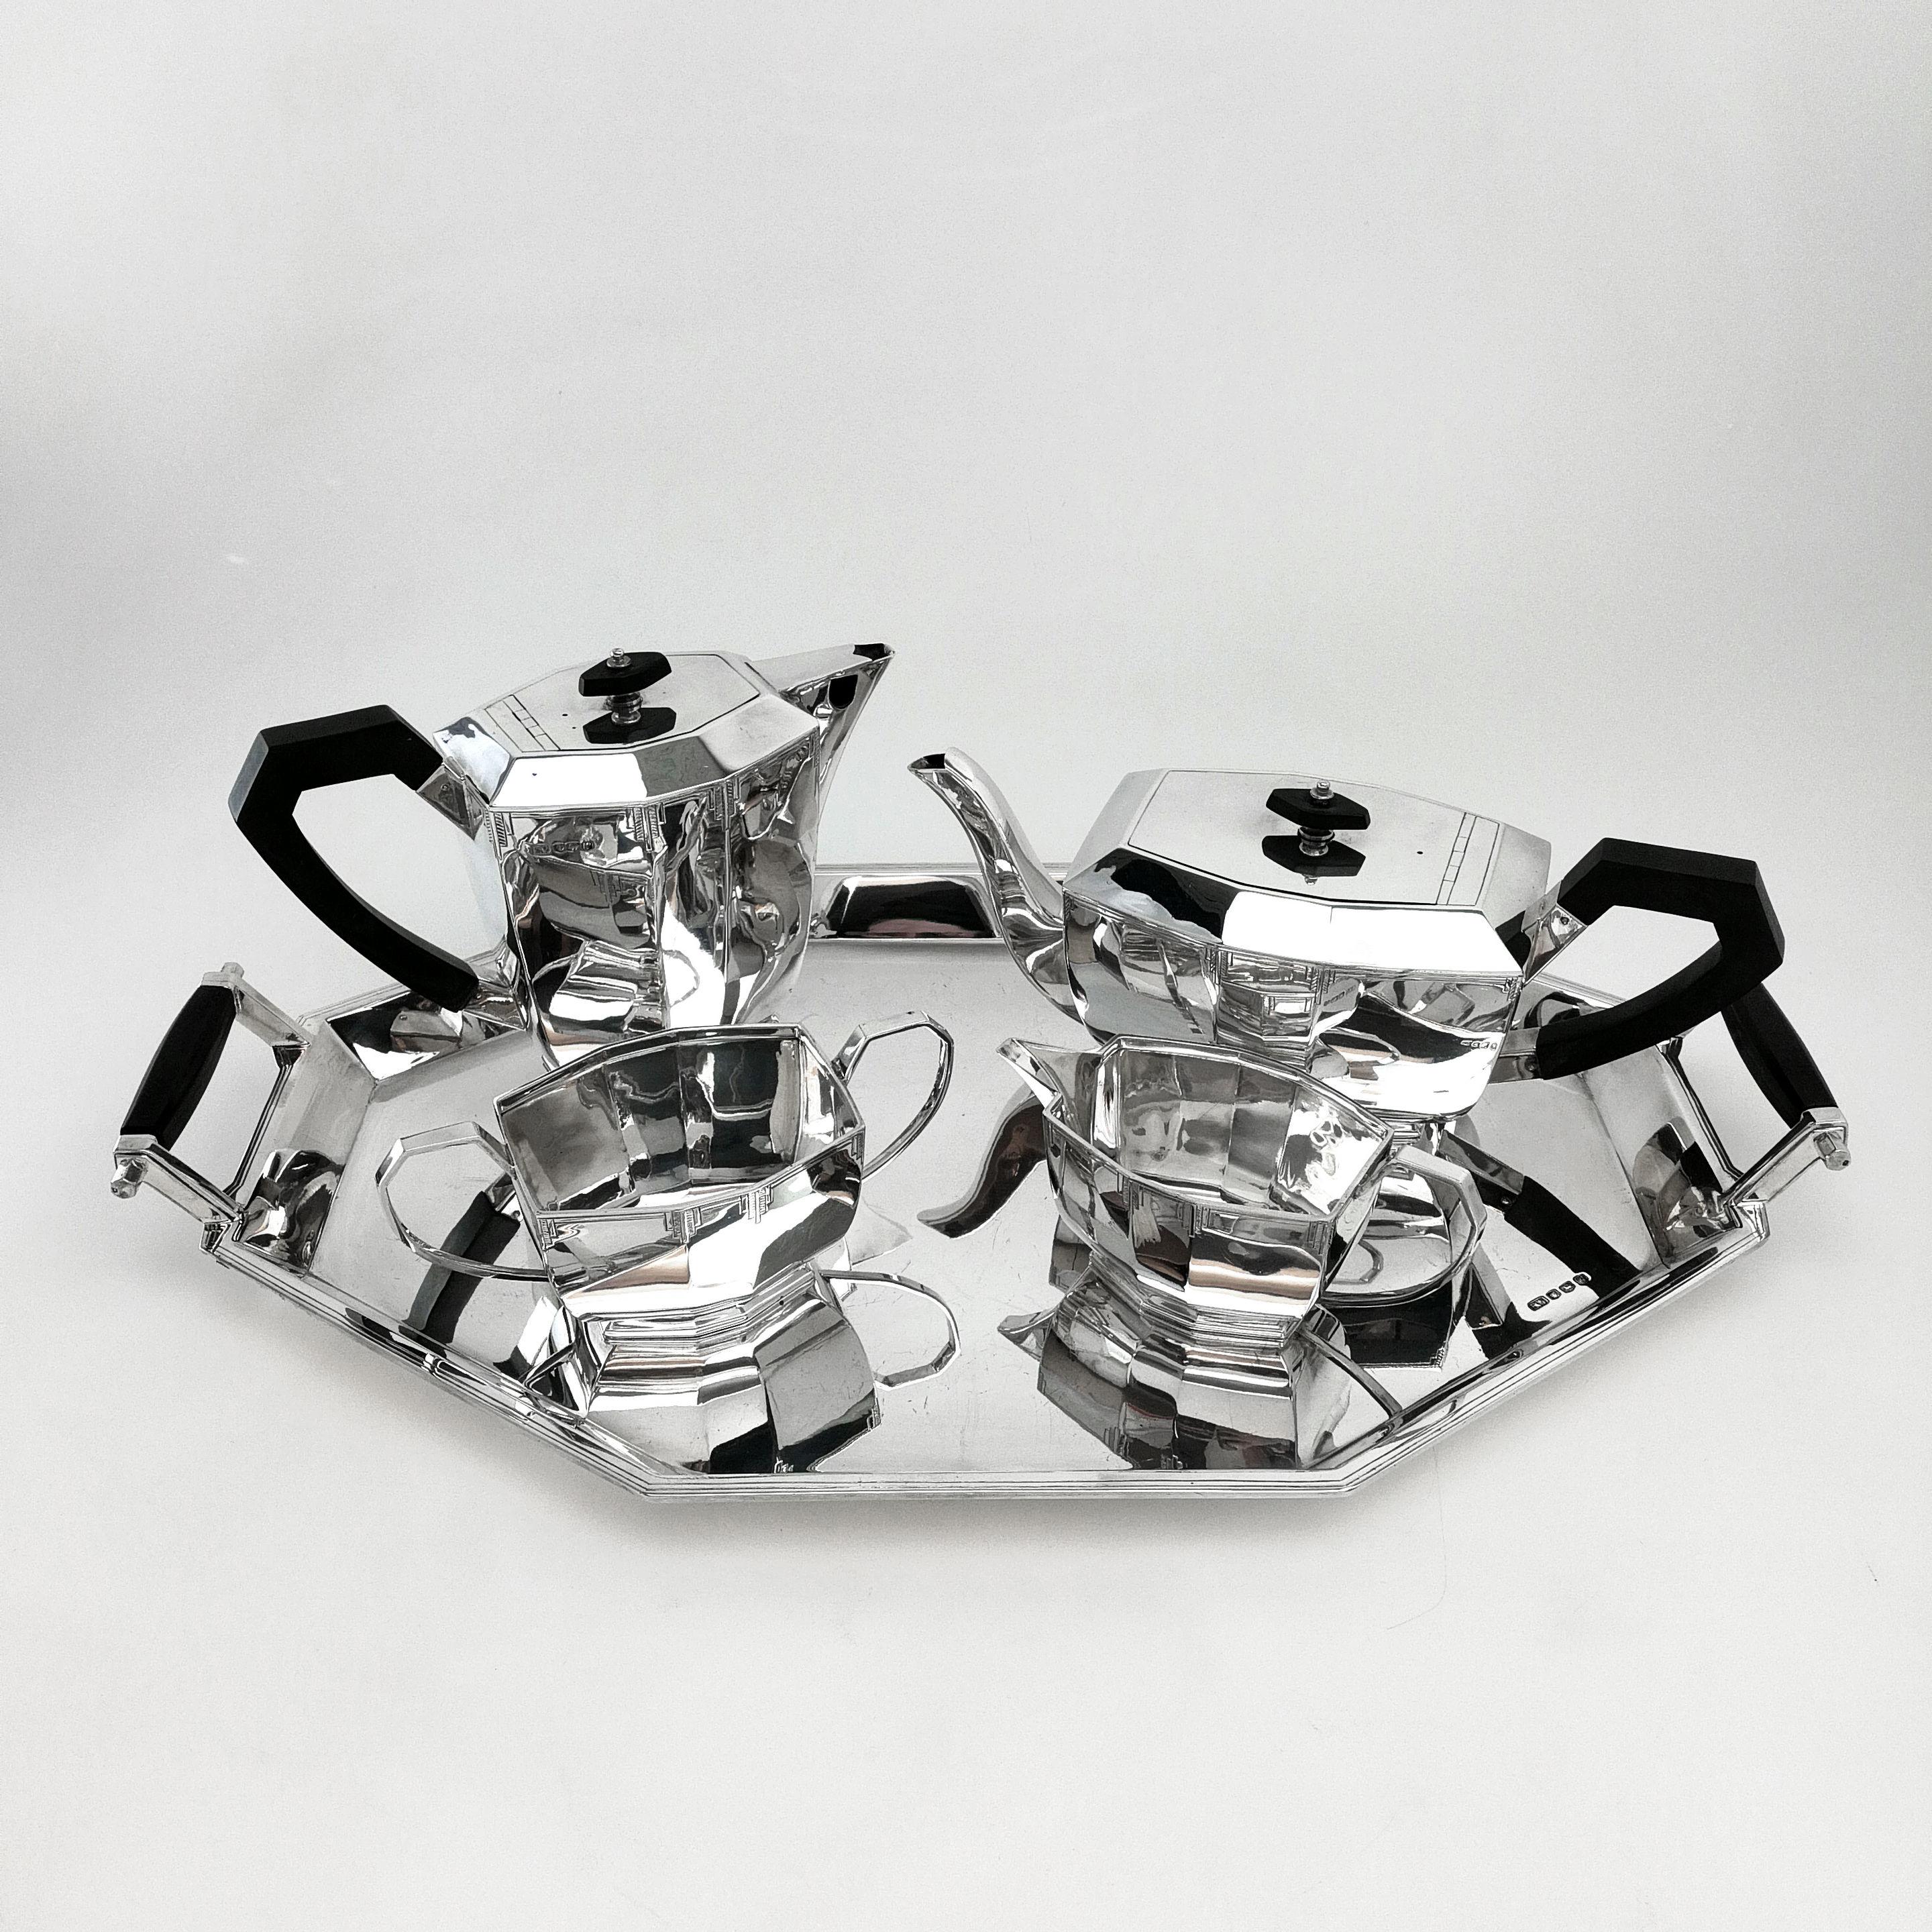 English Art Deco Sterling Silver 4-Piece Tea and Coffee Set on Tray, 1961-1963